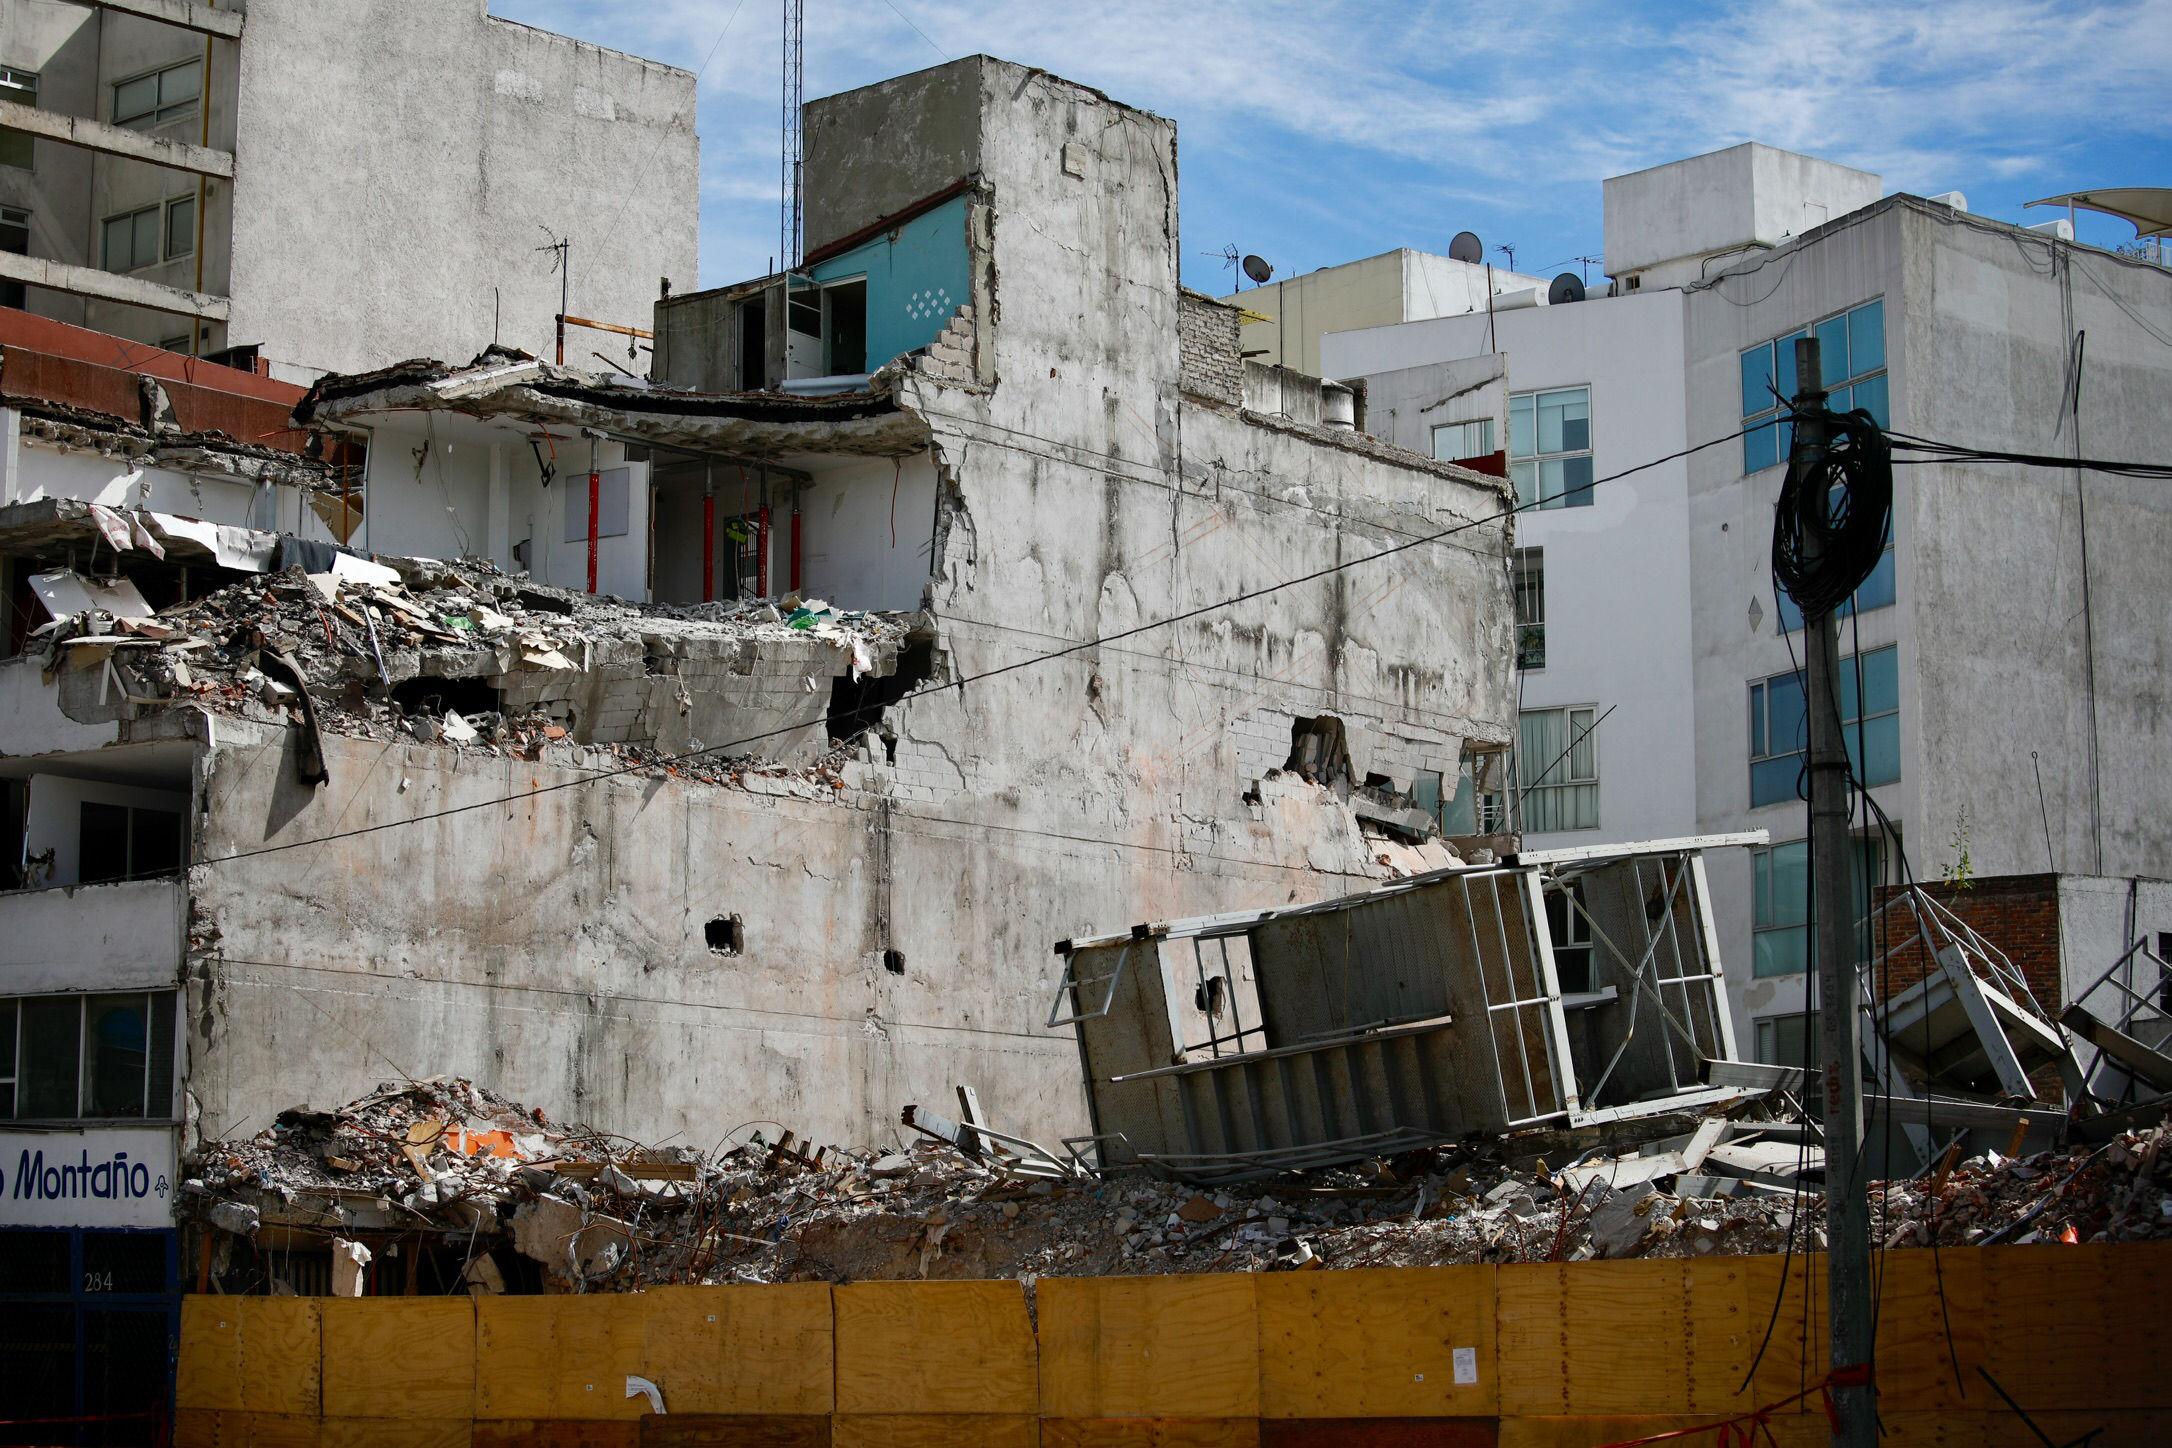 A badly damaged, grey brick building is seen next to a space left by a building that collapsed, leaving piles of rubble.  